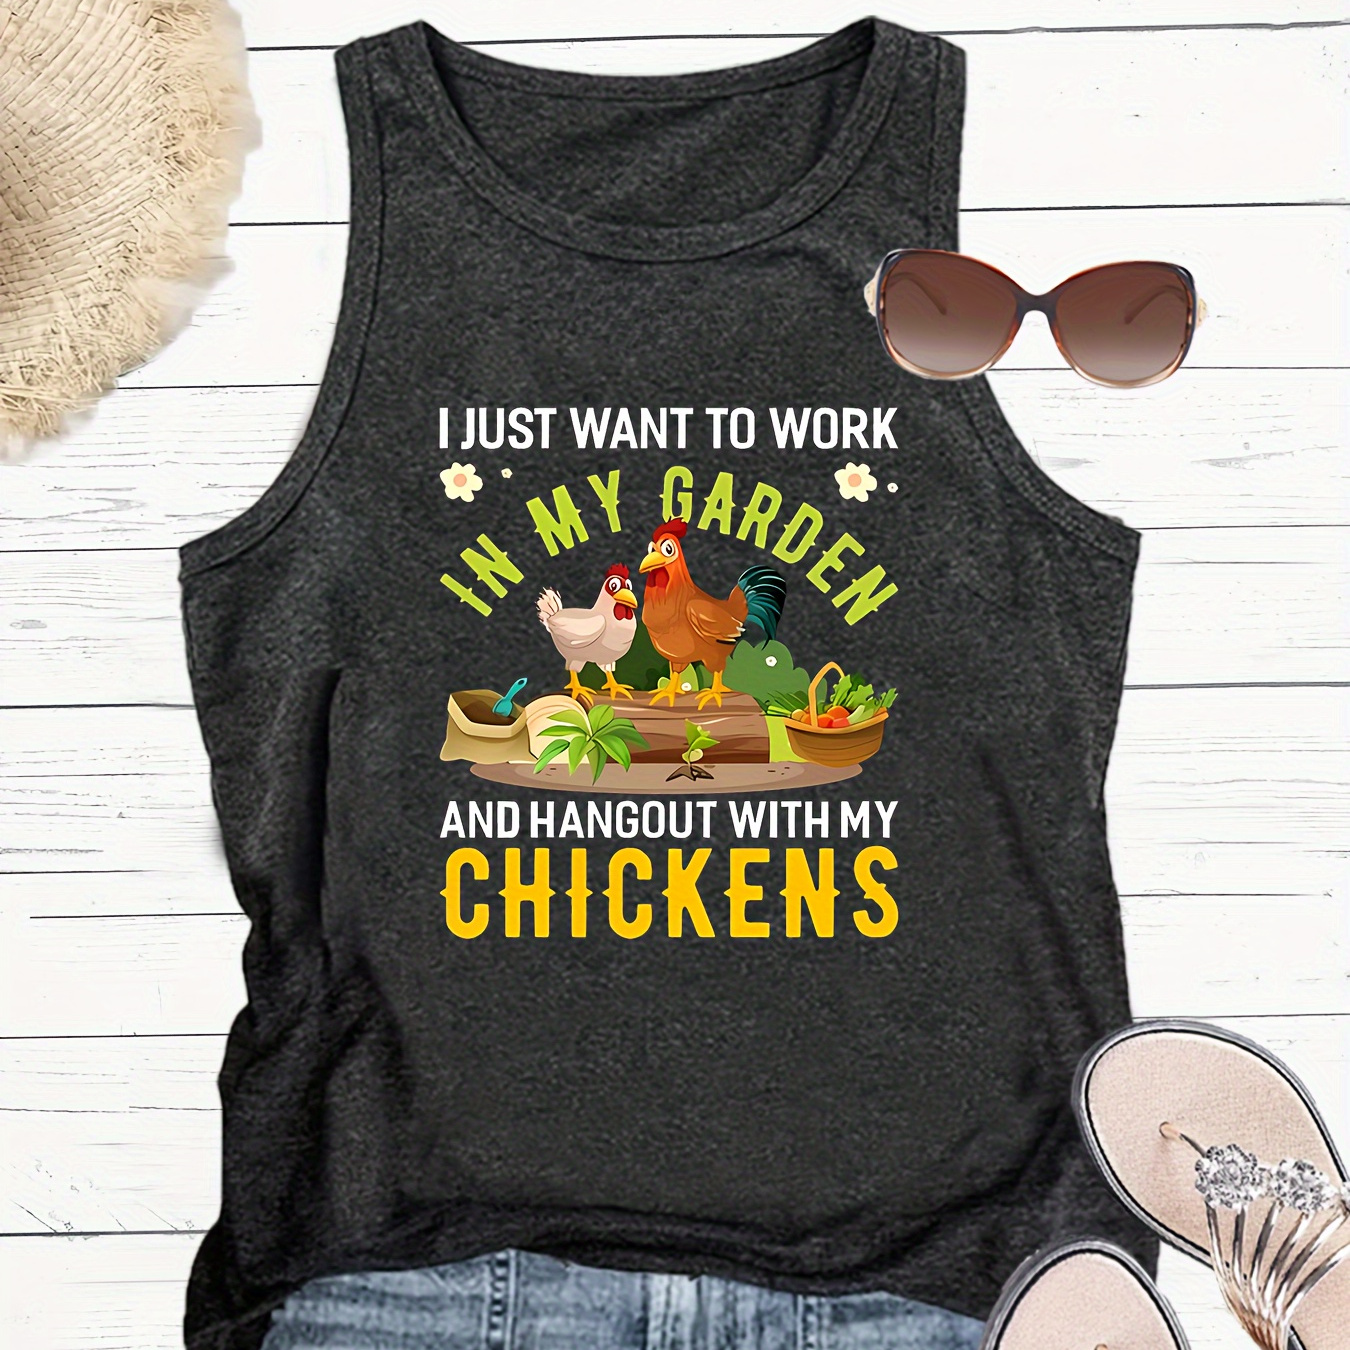 

Chicken & Letter Print Crew Neck Tank Top, Casual Sleeveless Tank Top For Summer, Women's Clothing